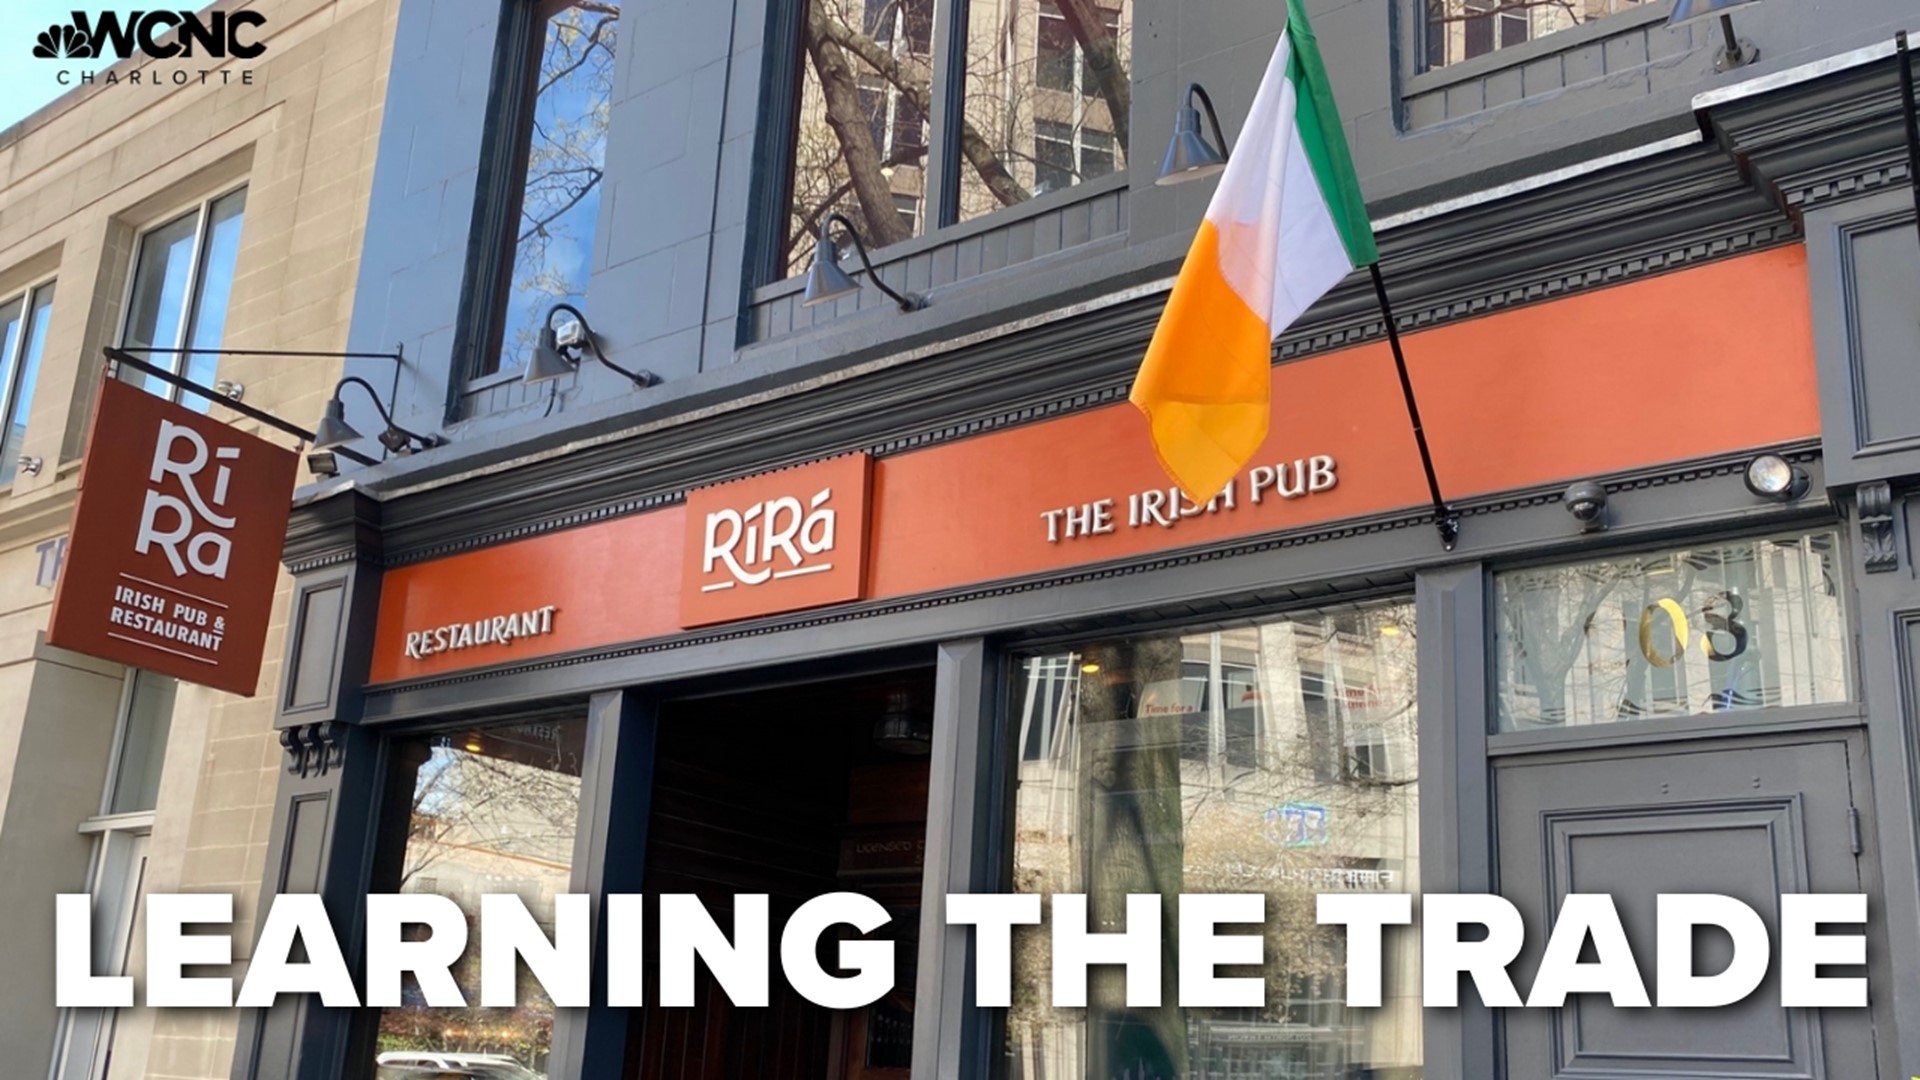 Trainees in the international program learn skills on how to run a bar with the goal of taking it back to Ireland.